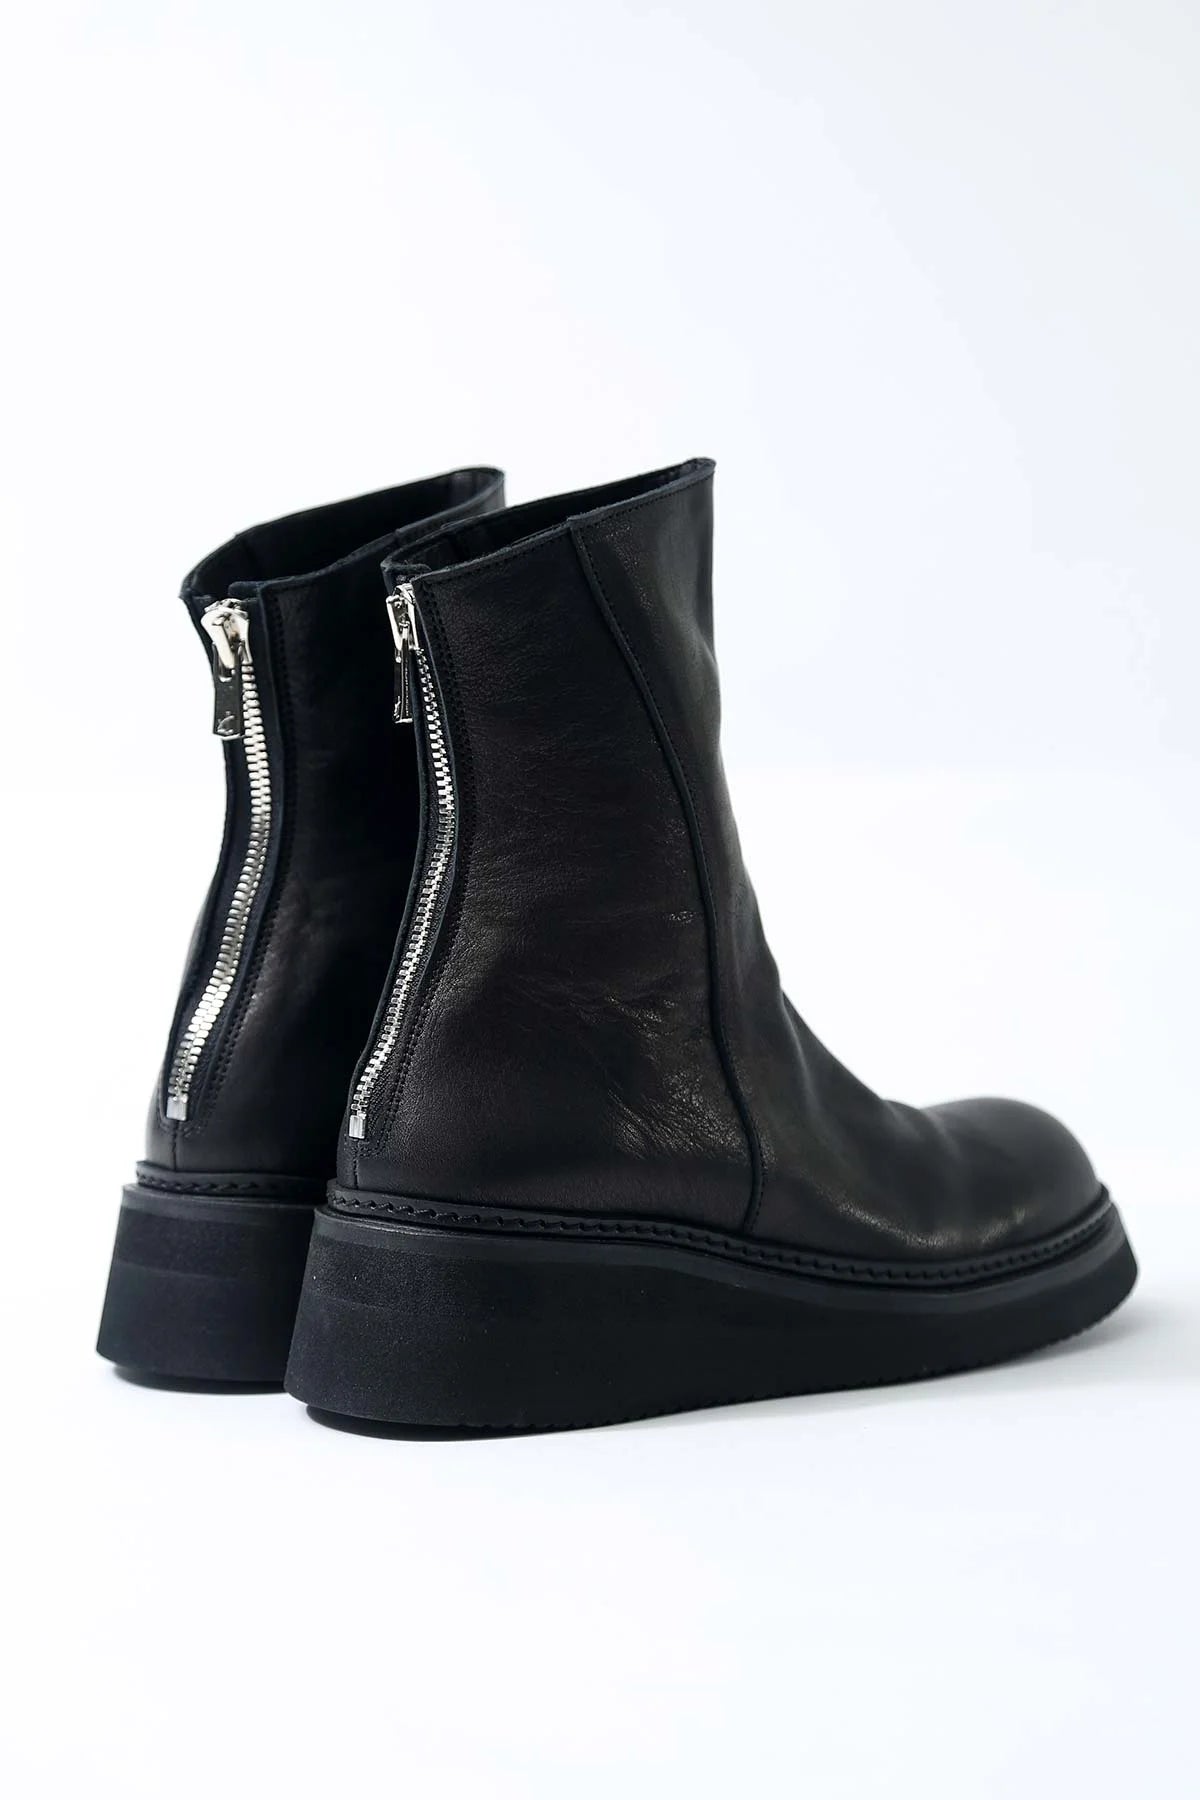 【Portaille】 FRONT DRAPE LEATHER BOOTS PQ01F_BLACK